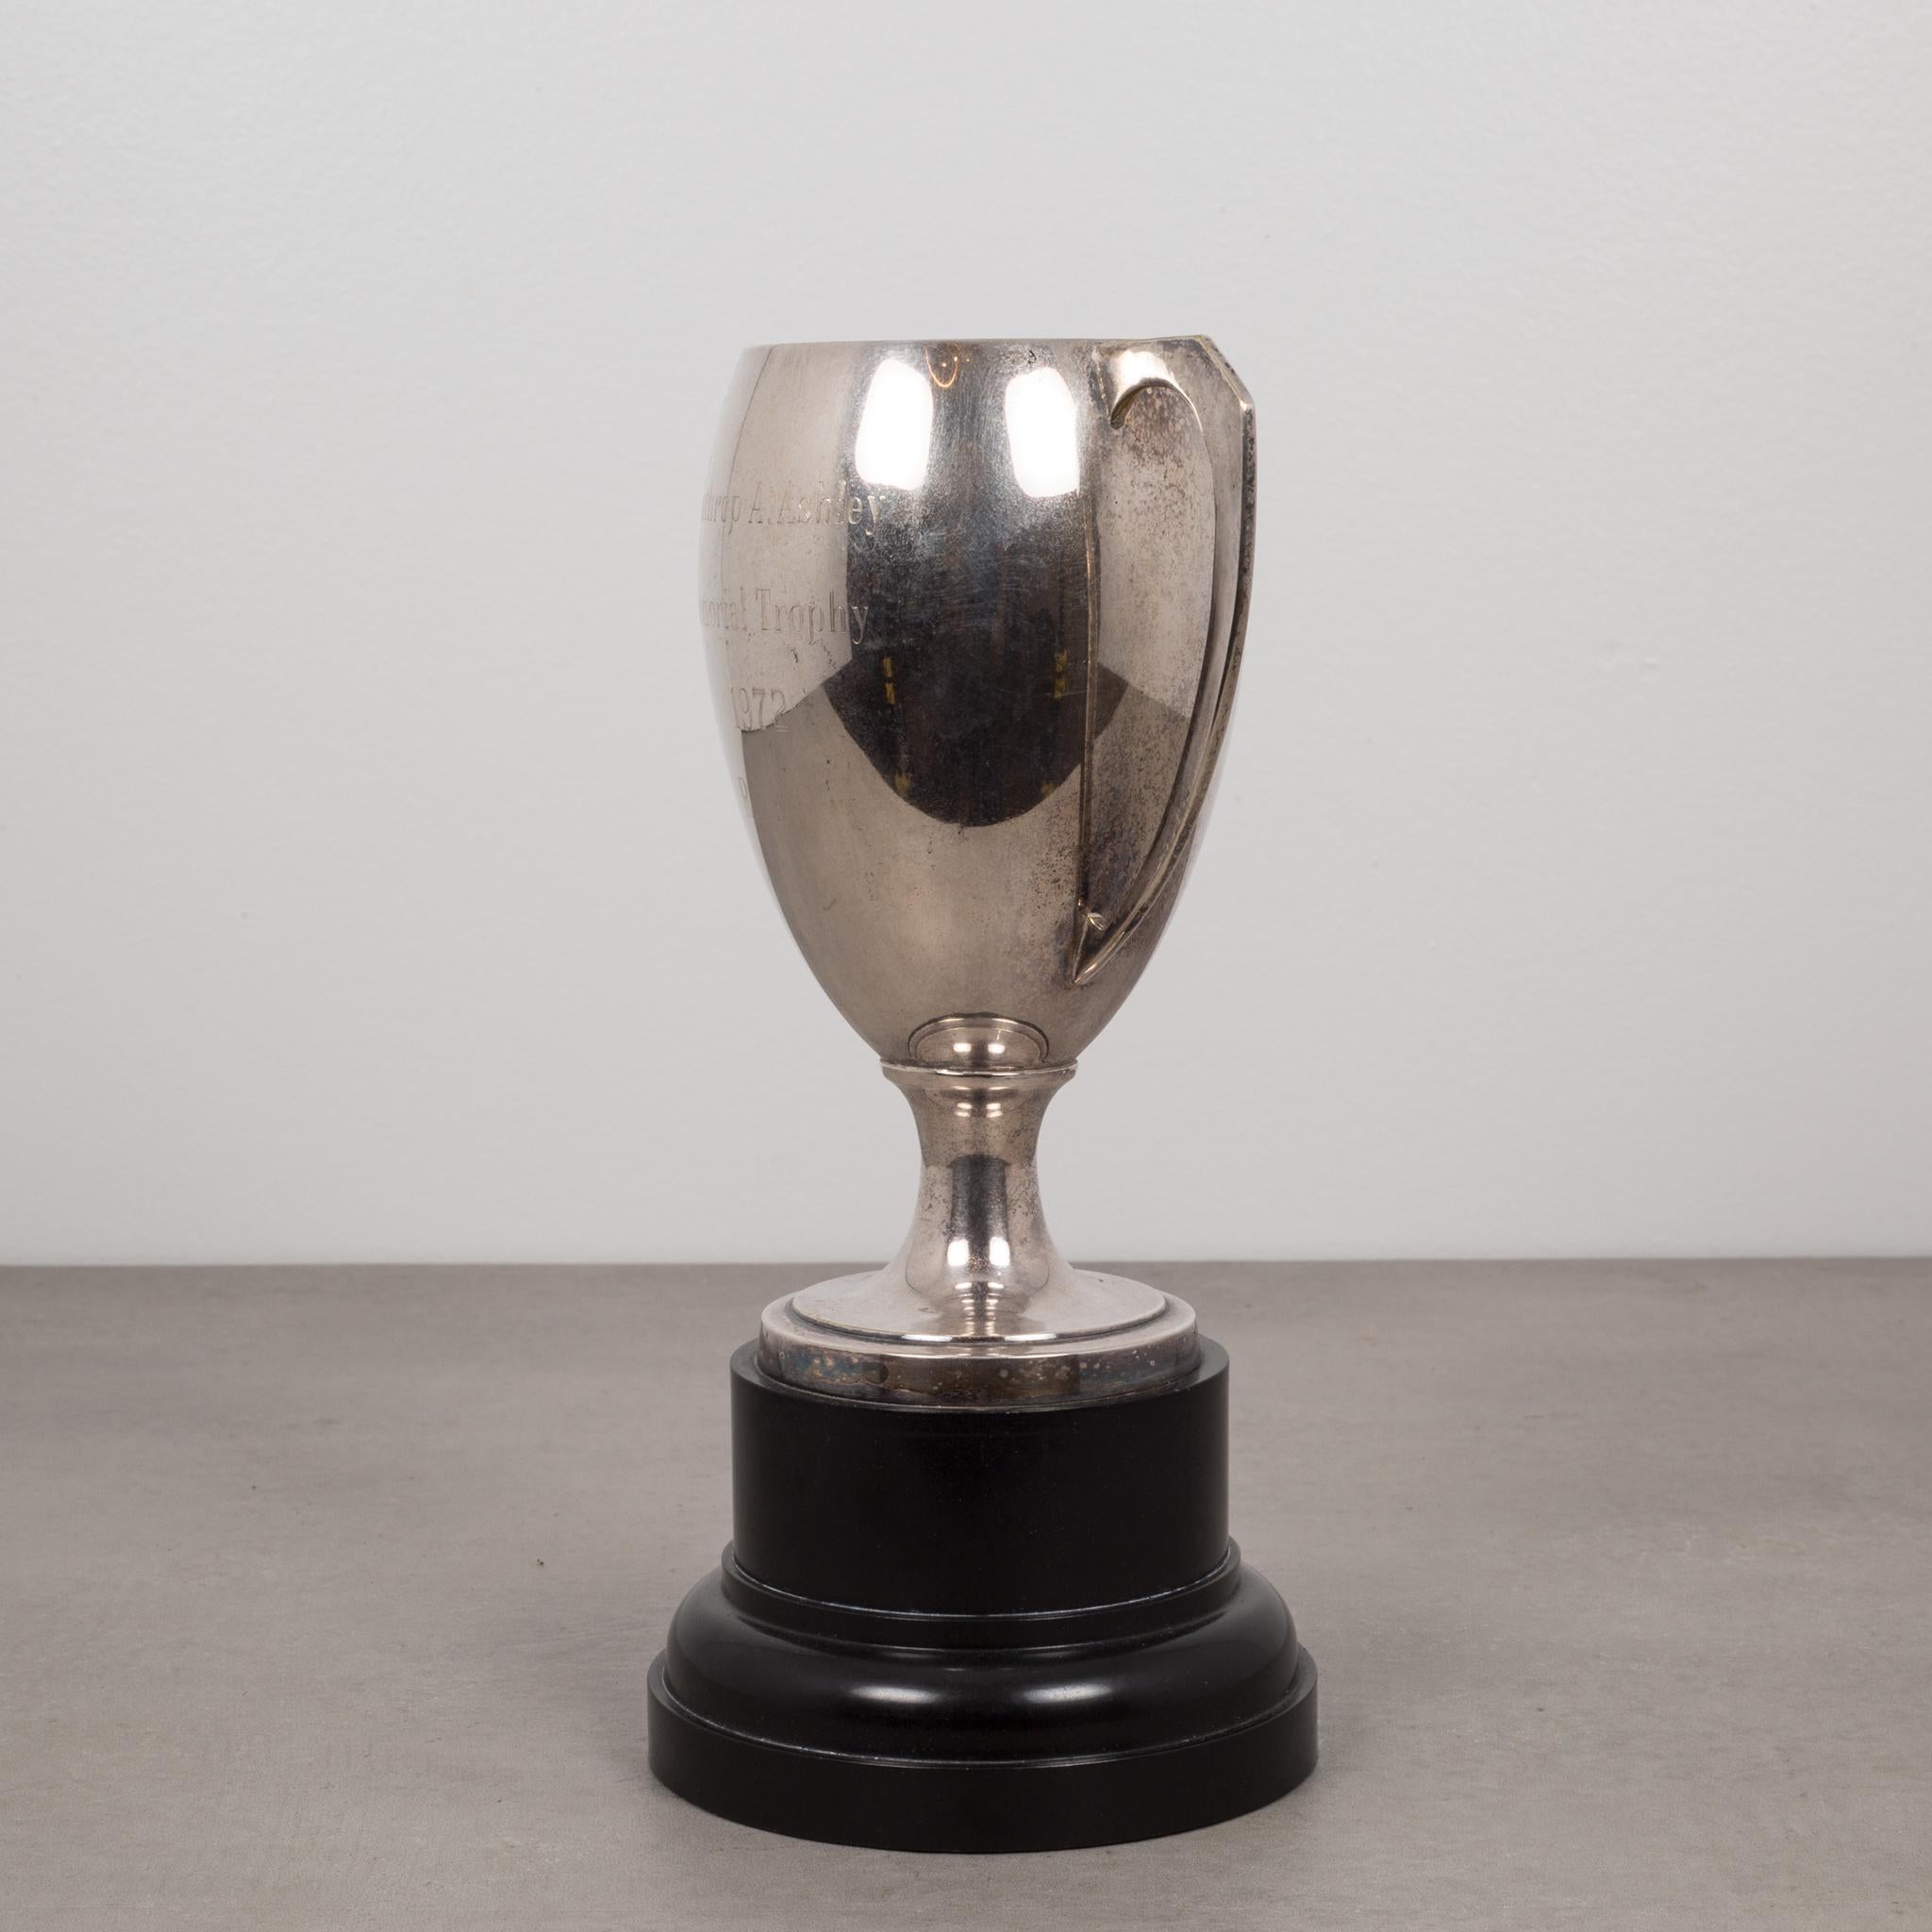 ABOUT

This is an original Mid-century trophy. The cup is silver plated with a black base. The cup is inscribed 